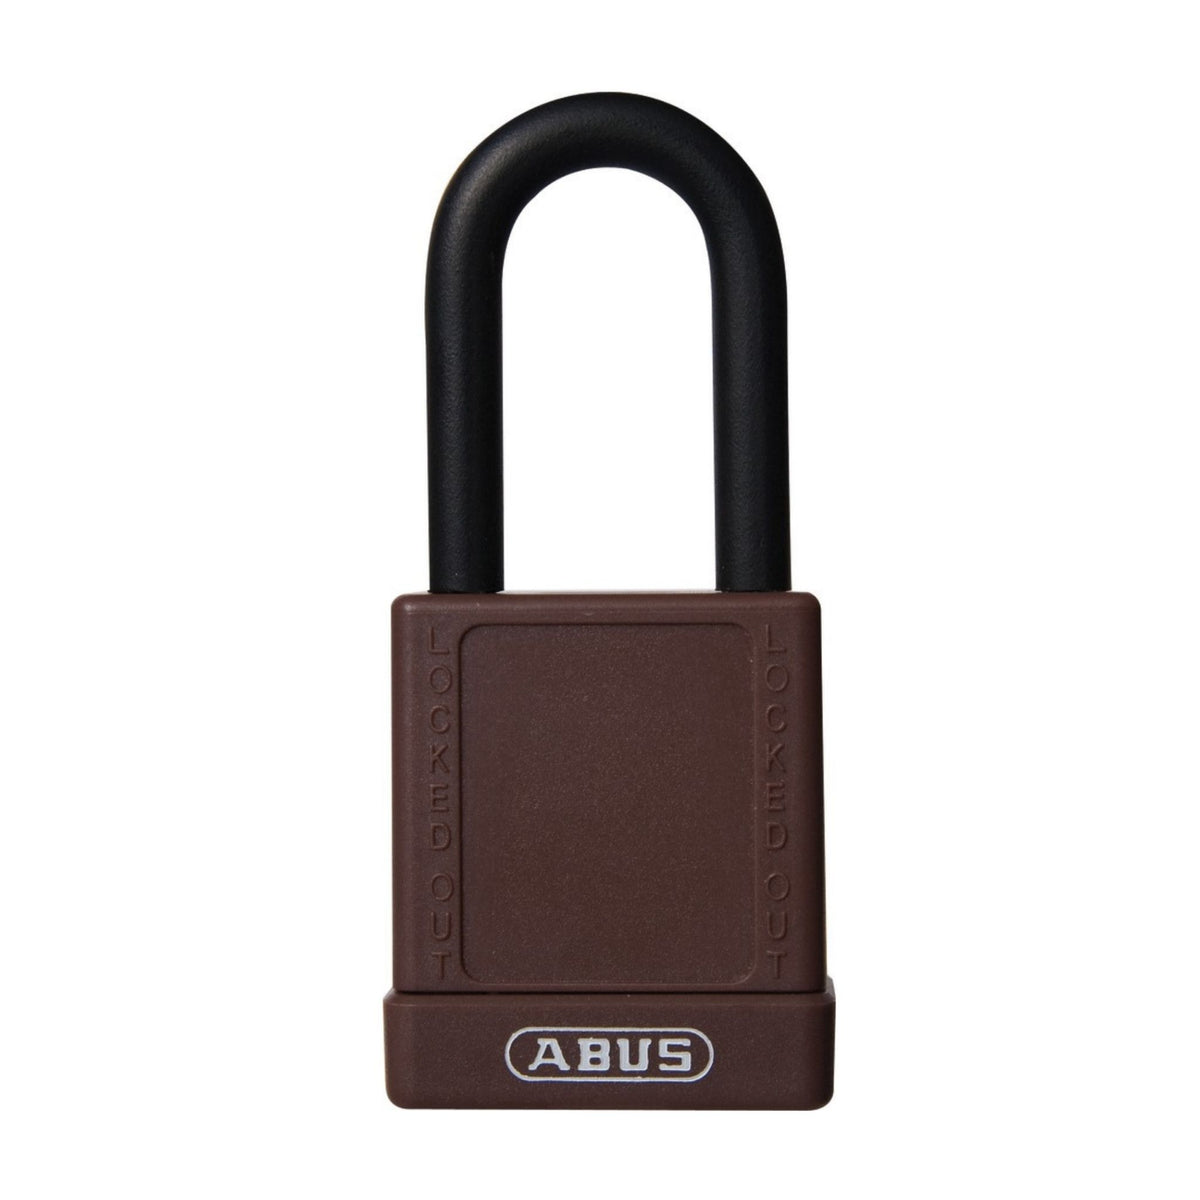 Abus 74/40 KD Keyed Different Brown Insulated Safety Padlock - The Lock Source